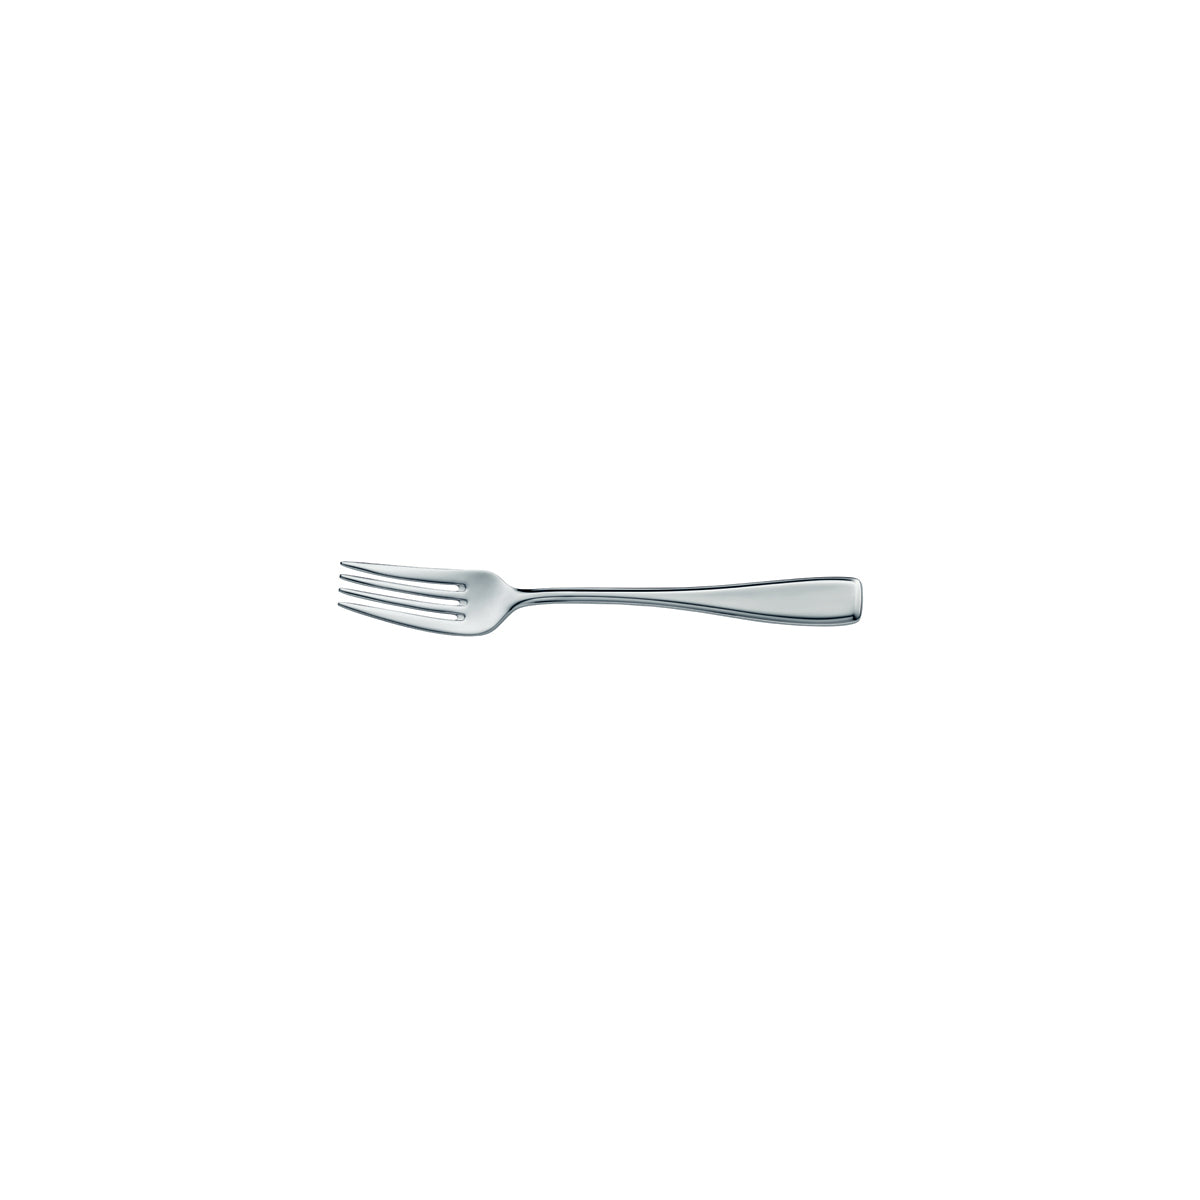 12.7964.6040 WMF Solid Cake Fork Stainless Steel Tomkin Australia Hospitality Supplies